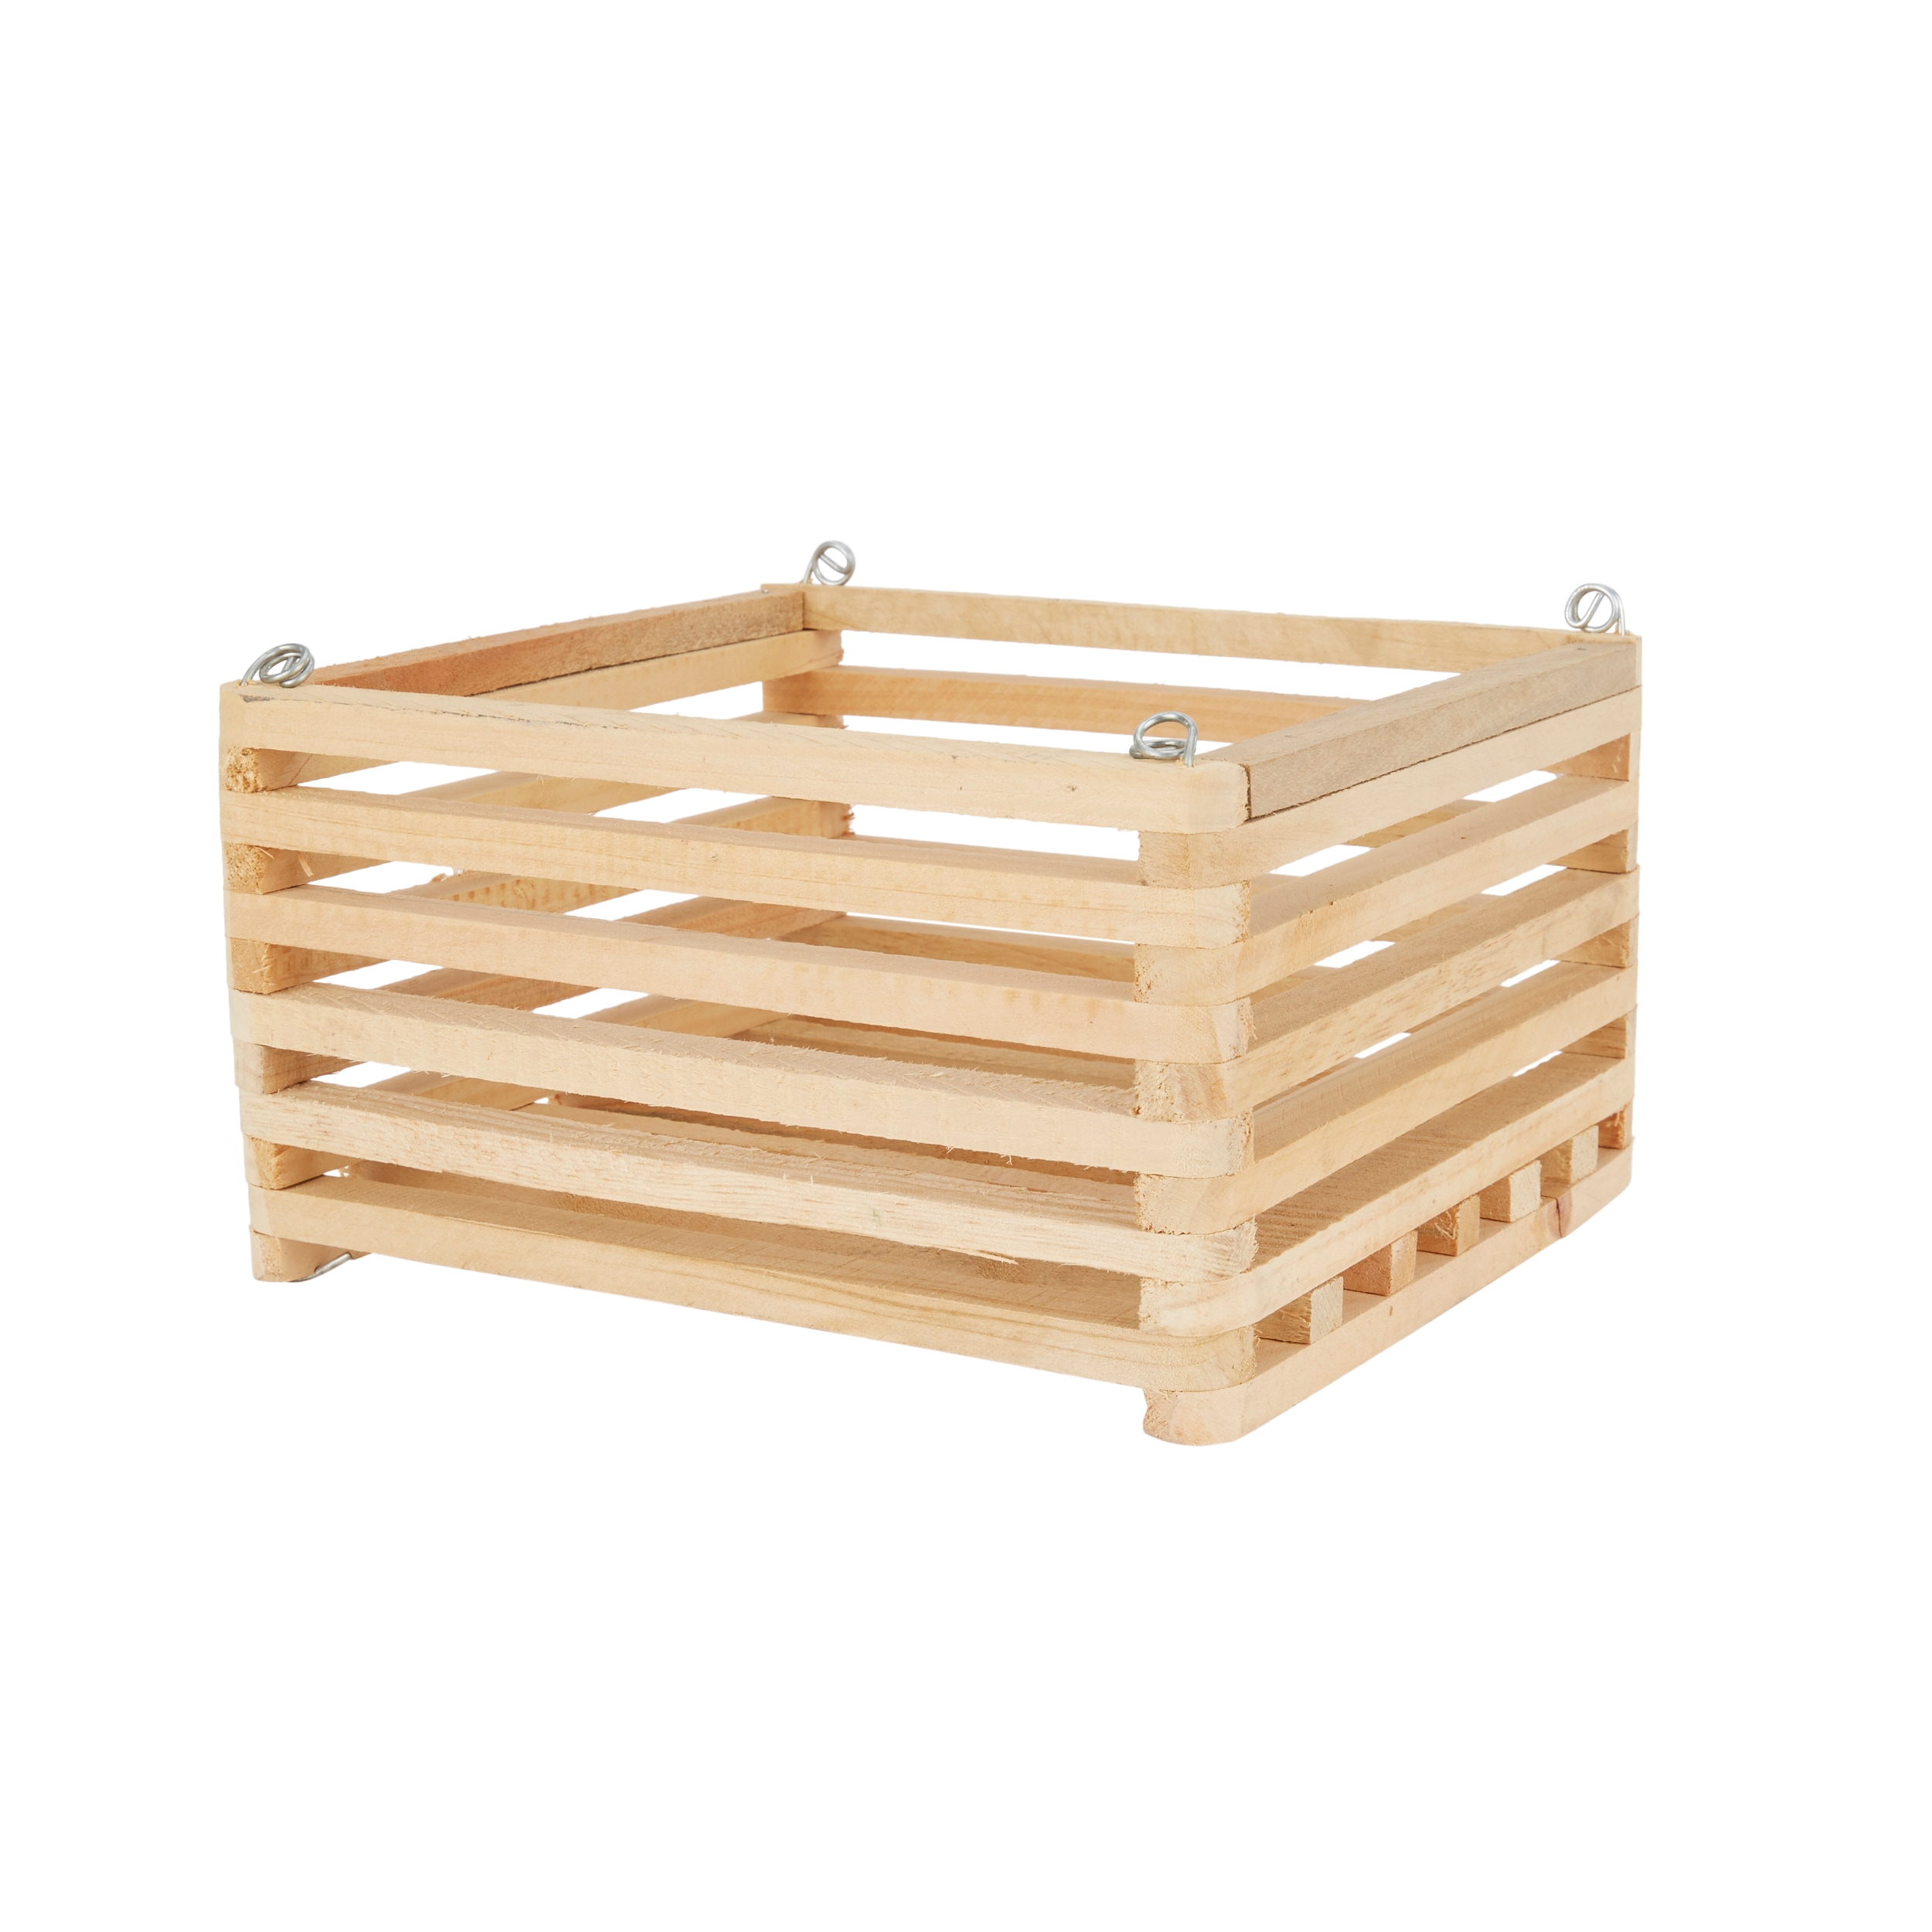 Better-Gro 4-in W x 4-in H Natural Wood Basket